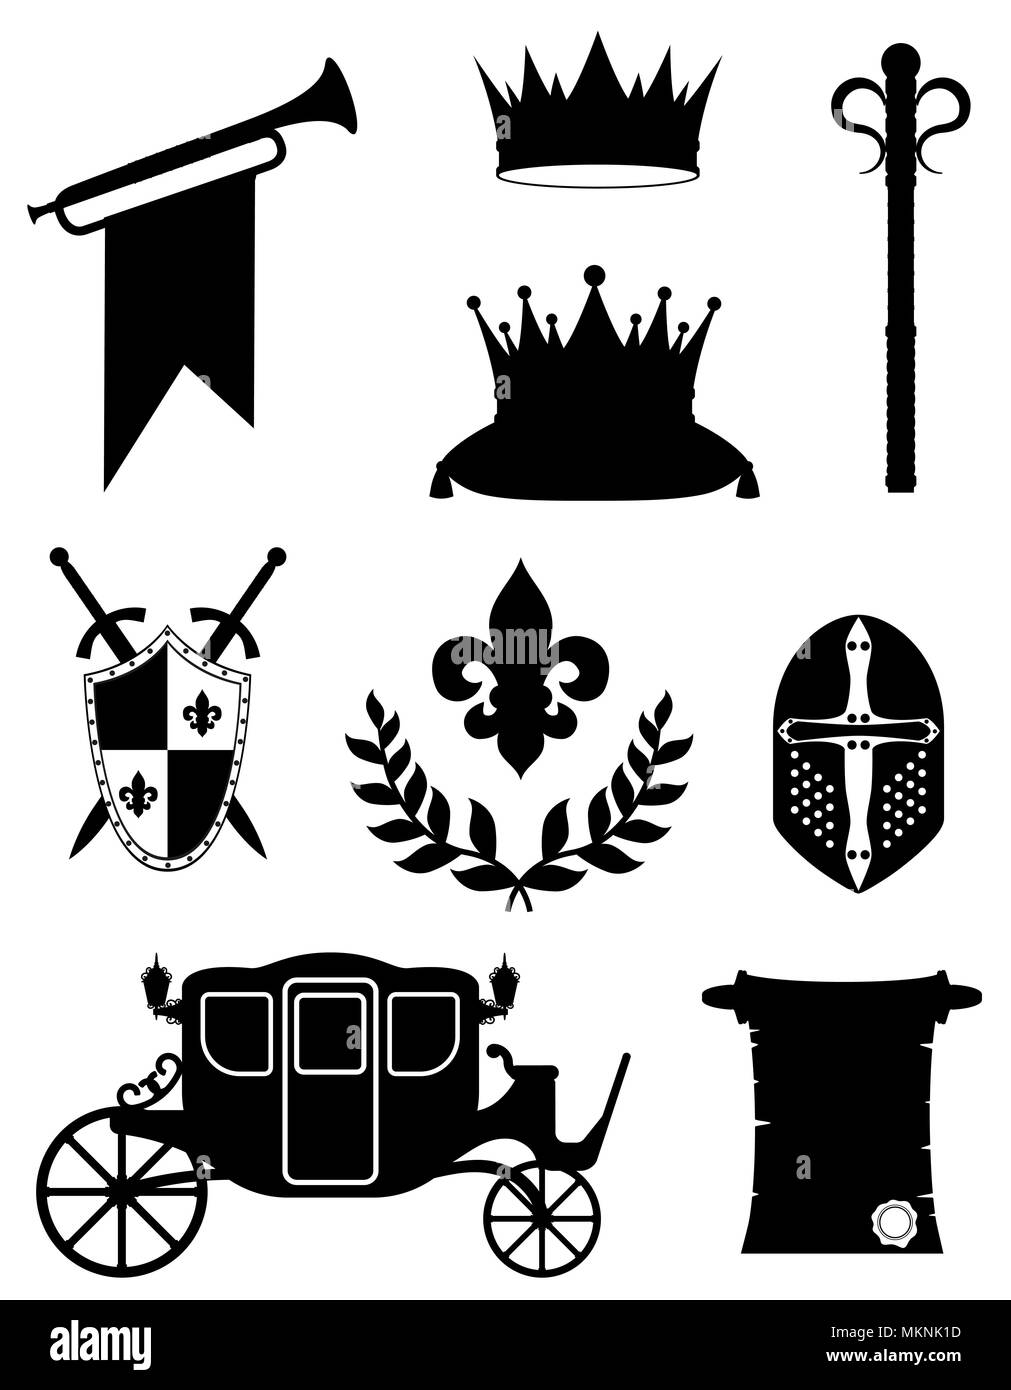 king royal golden attributes of medieval power black outline silhouette vector illustration isolated on white background Stock Photo